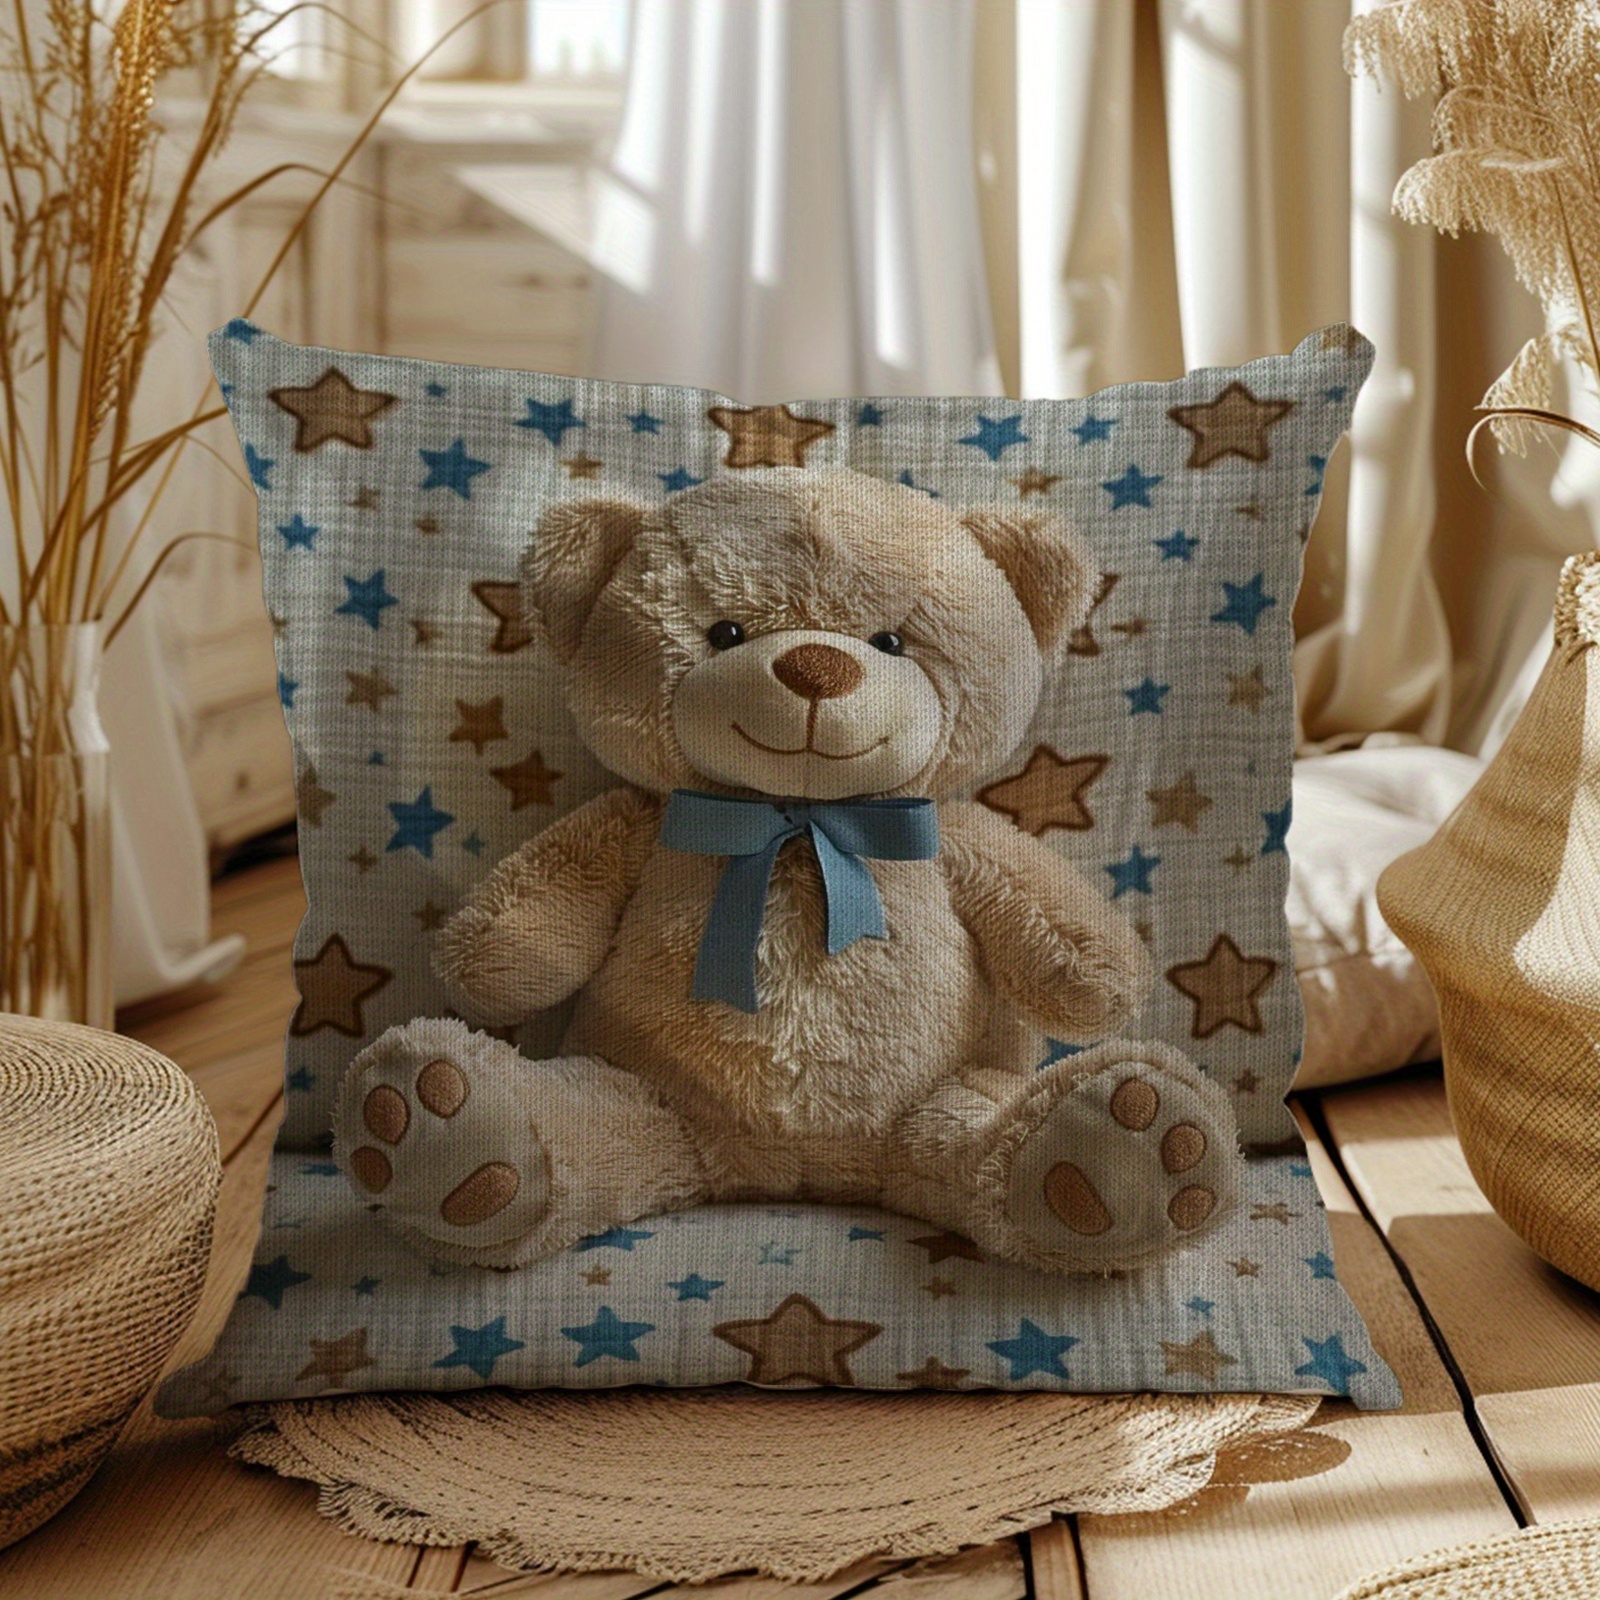 

Teddy Bear Print Throw Pillow Cover Set Of 1, Contemporary Style Woven Polyester, Zipper Closure, Machine Washable, 18x18 Inches - Versatile For Sofa, Bed, And Home Decor